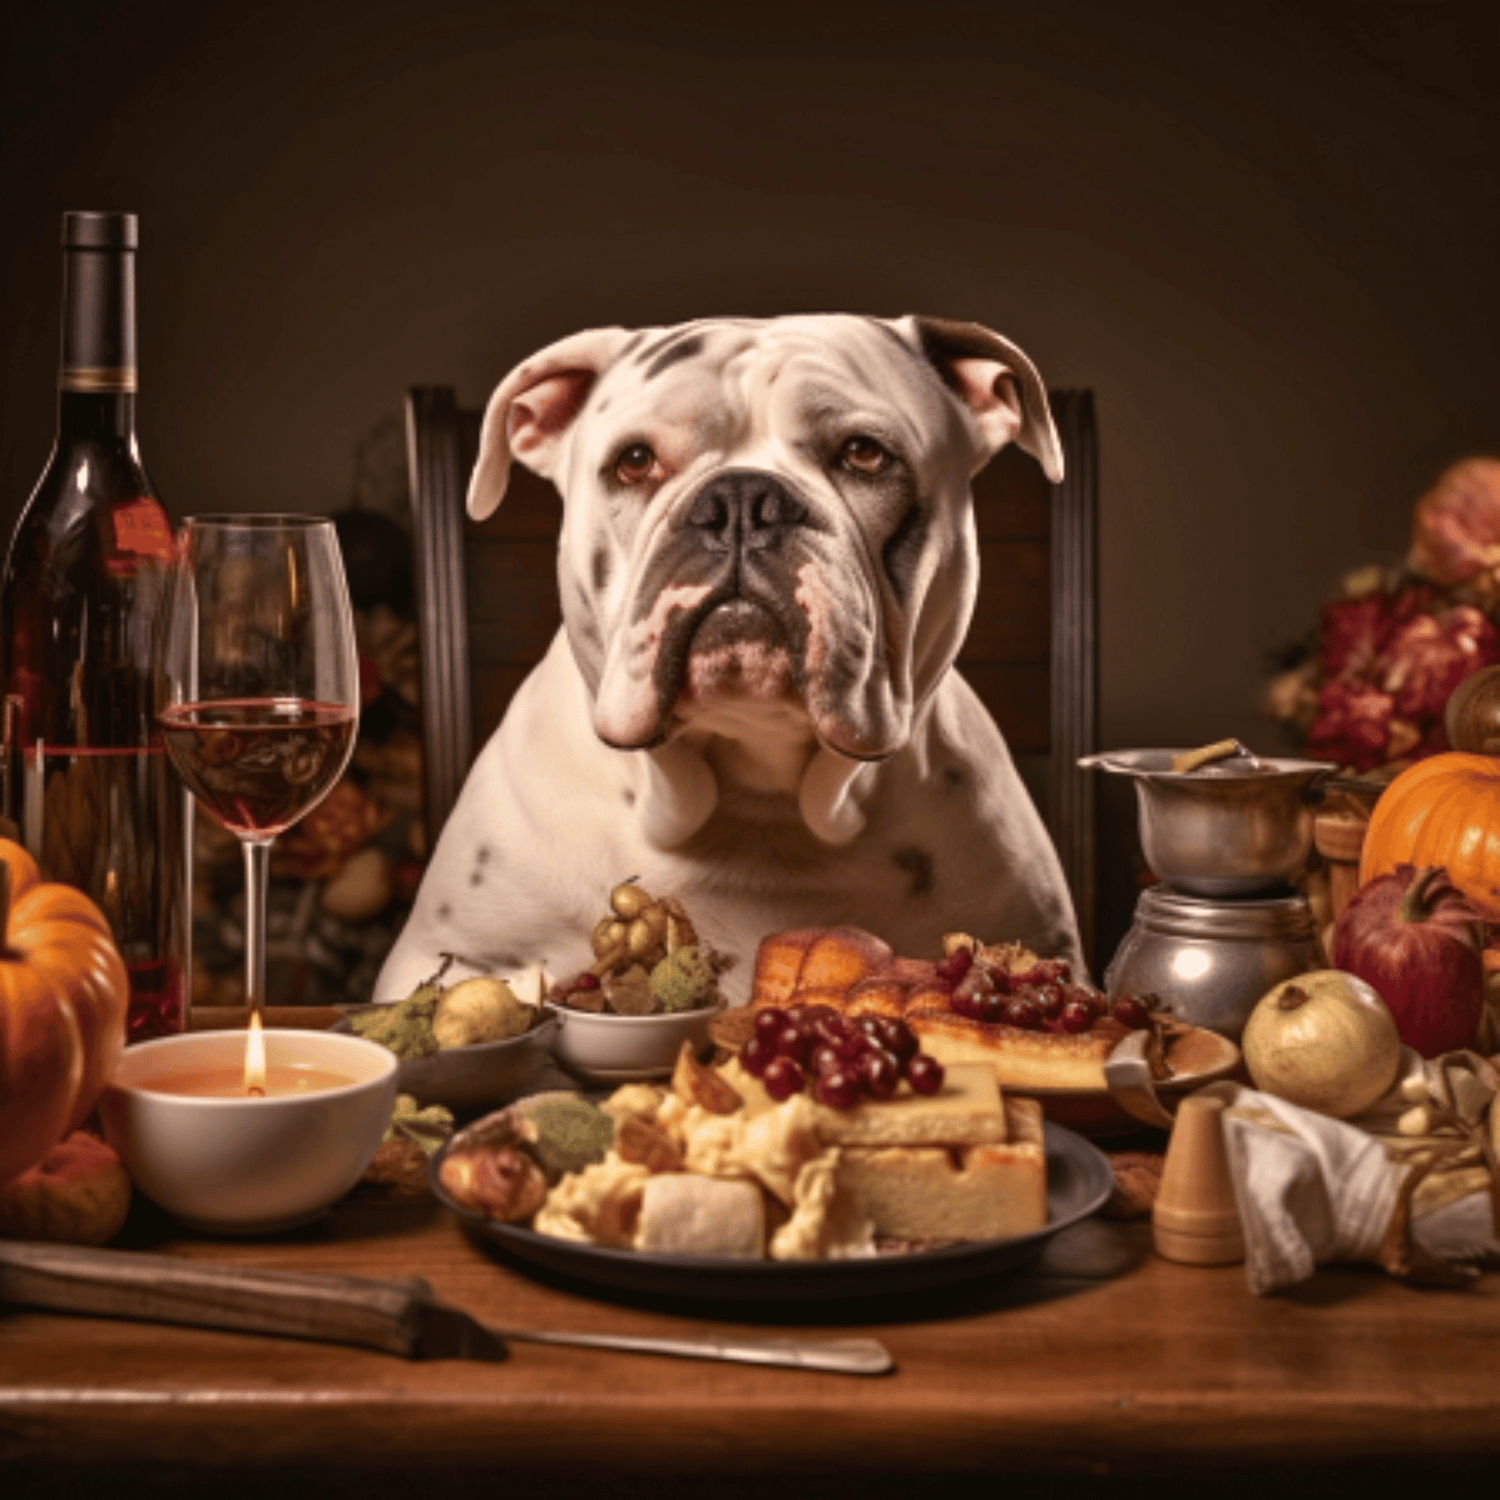 Bulldog-Friendly Thanksgiving: Celebrating Safely with Your Pup